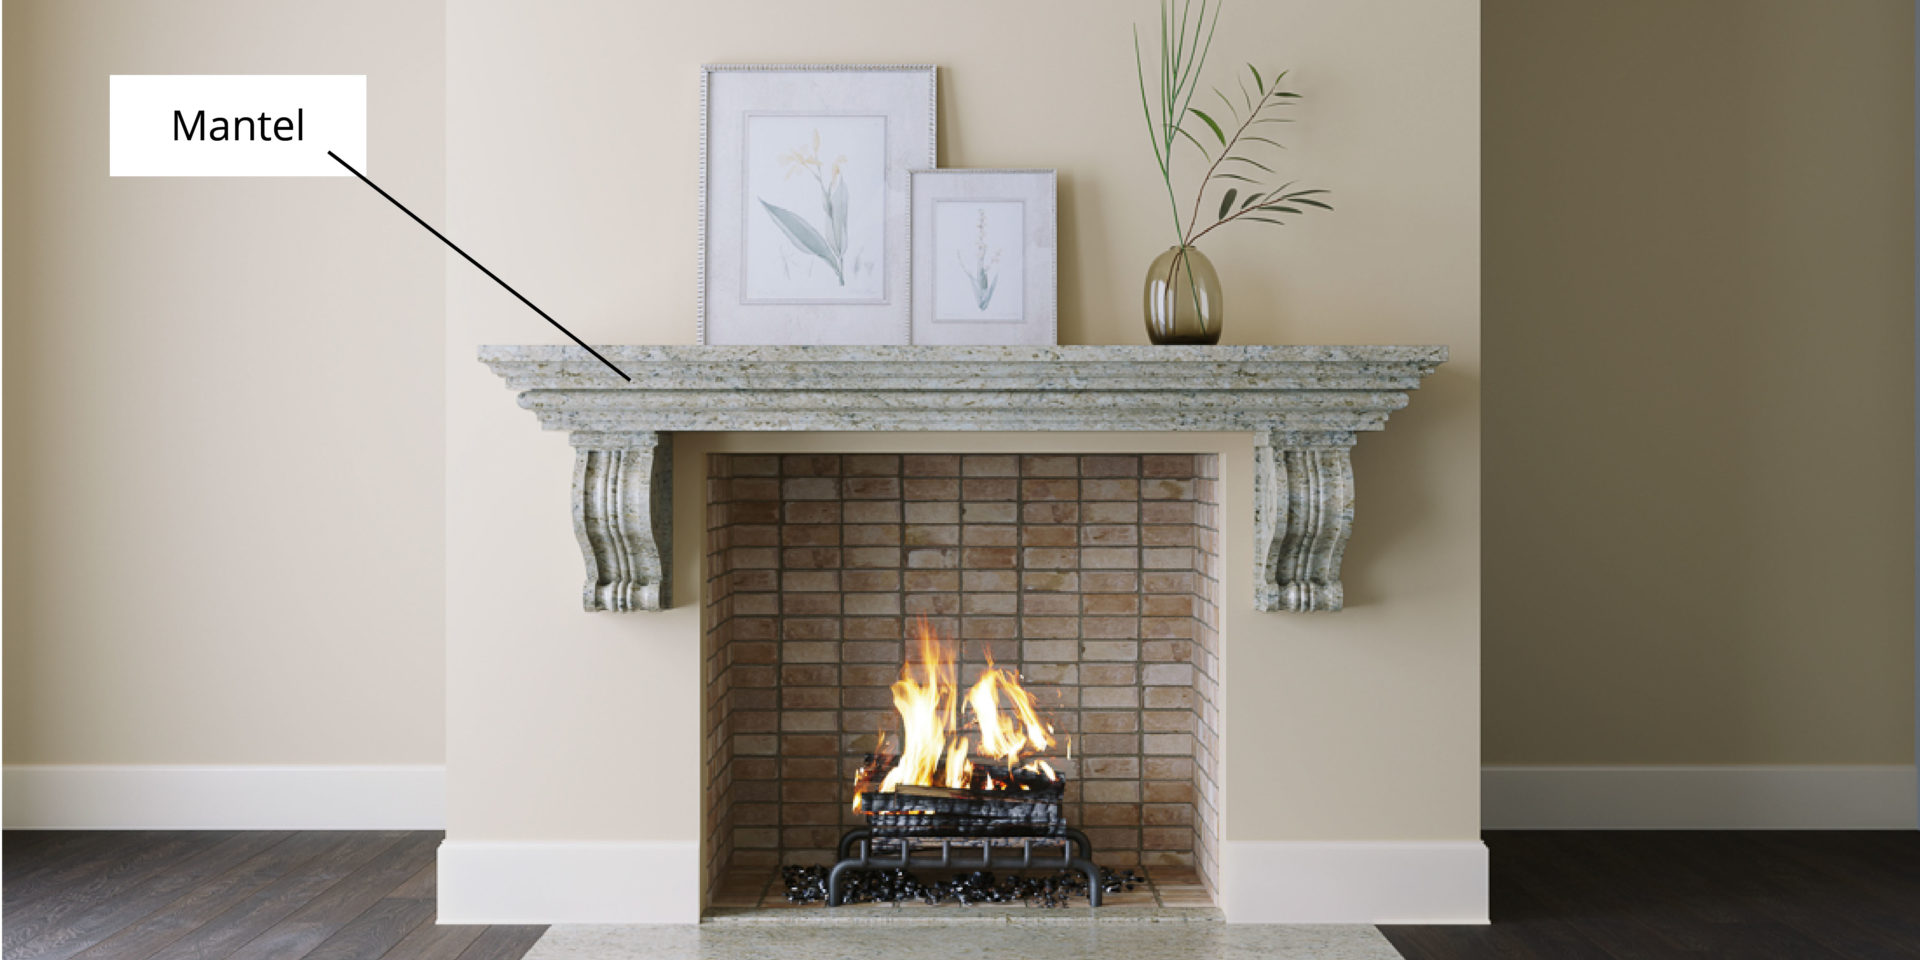 Fireplace Terms 101 The Ultimate Guide, What Is The Back Of A Fireplace Called